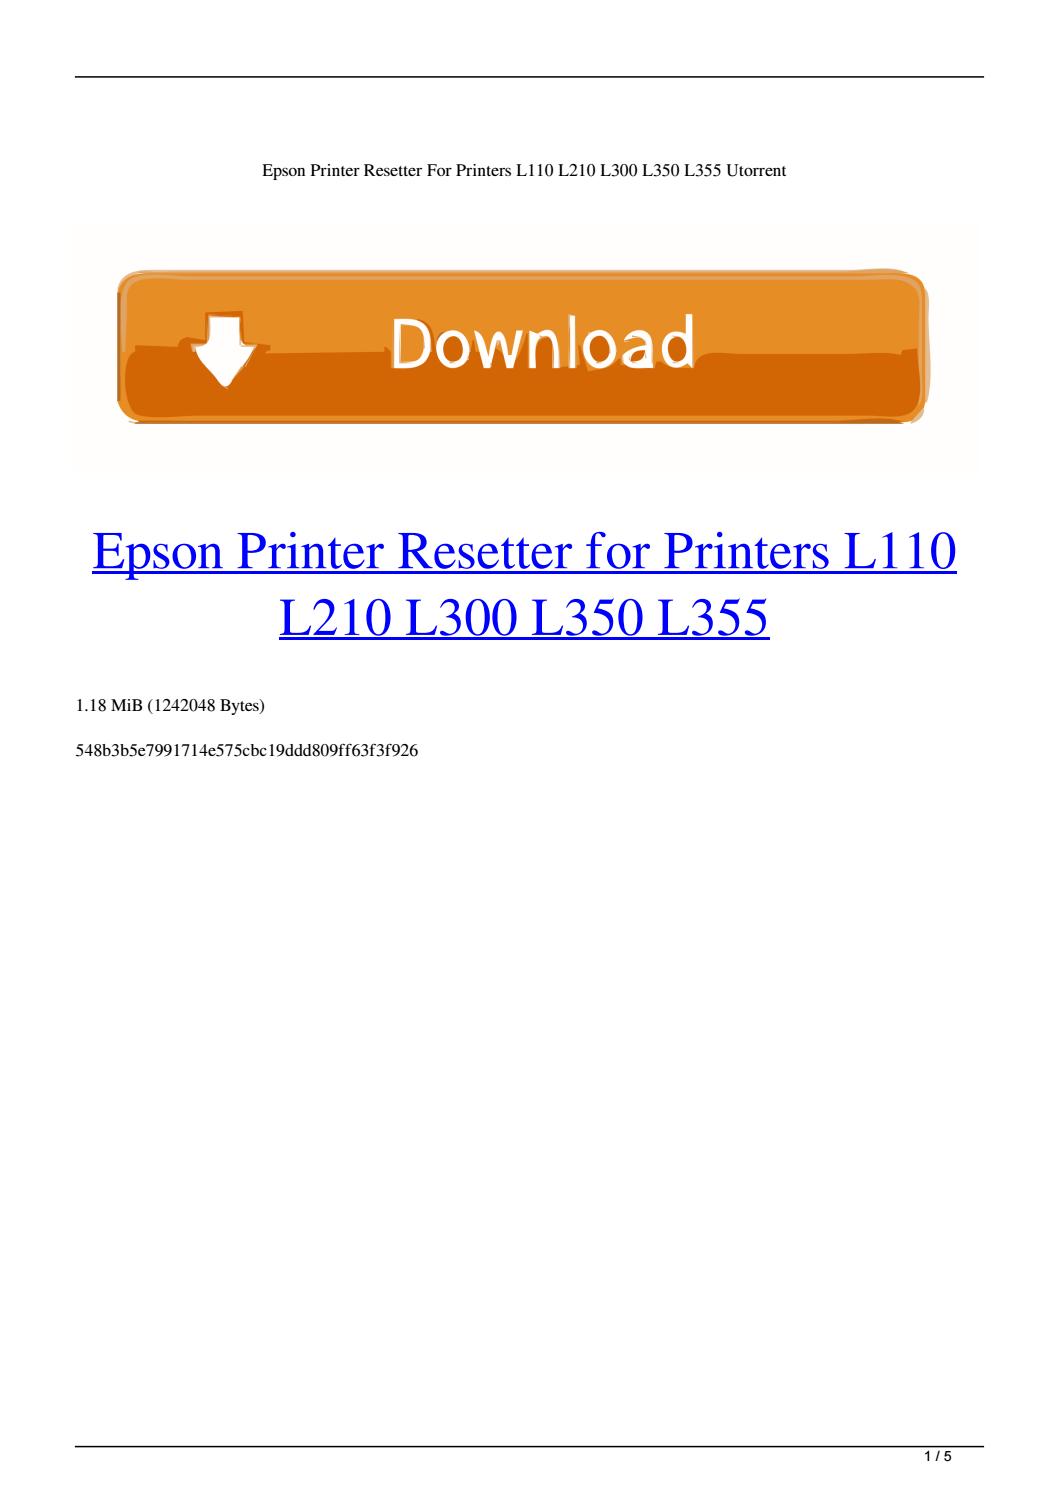 Download epson resetter tool l110